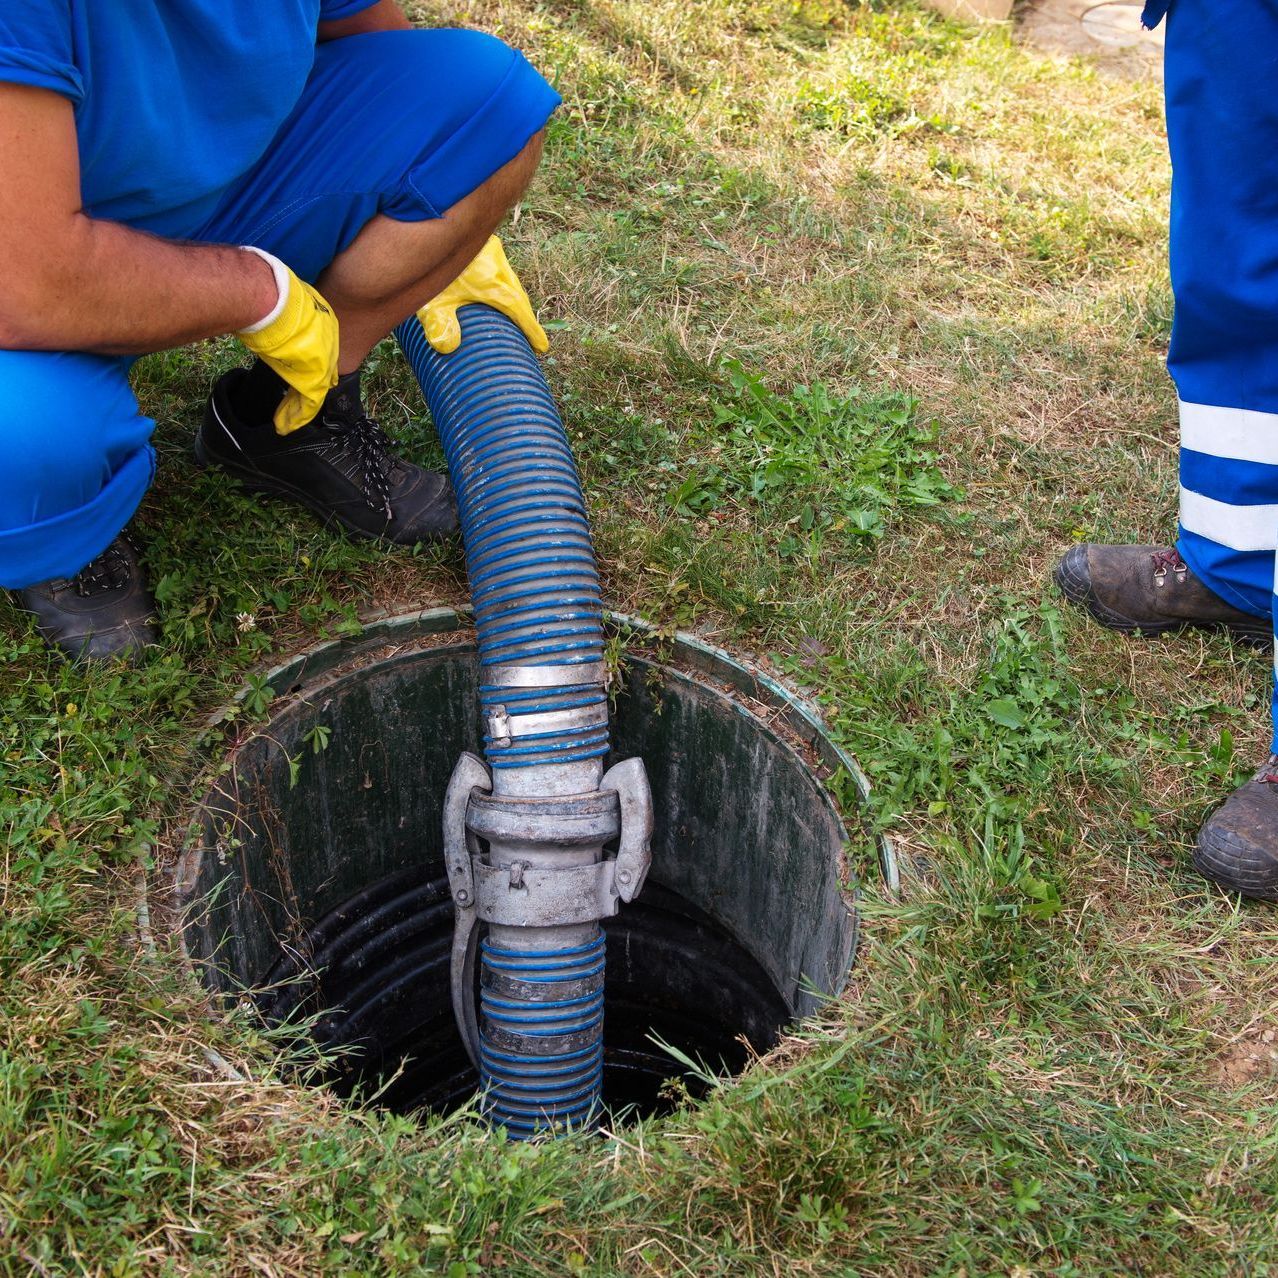 a man is kneeling in the grass with a hose coming out of a hole in the ground